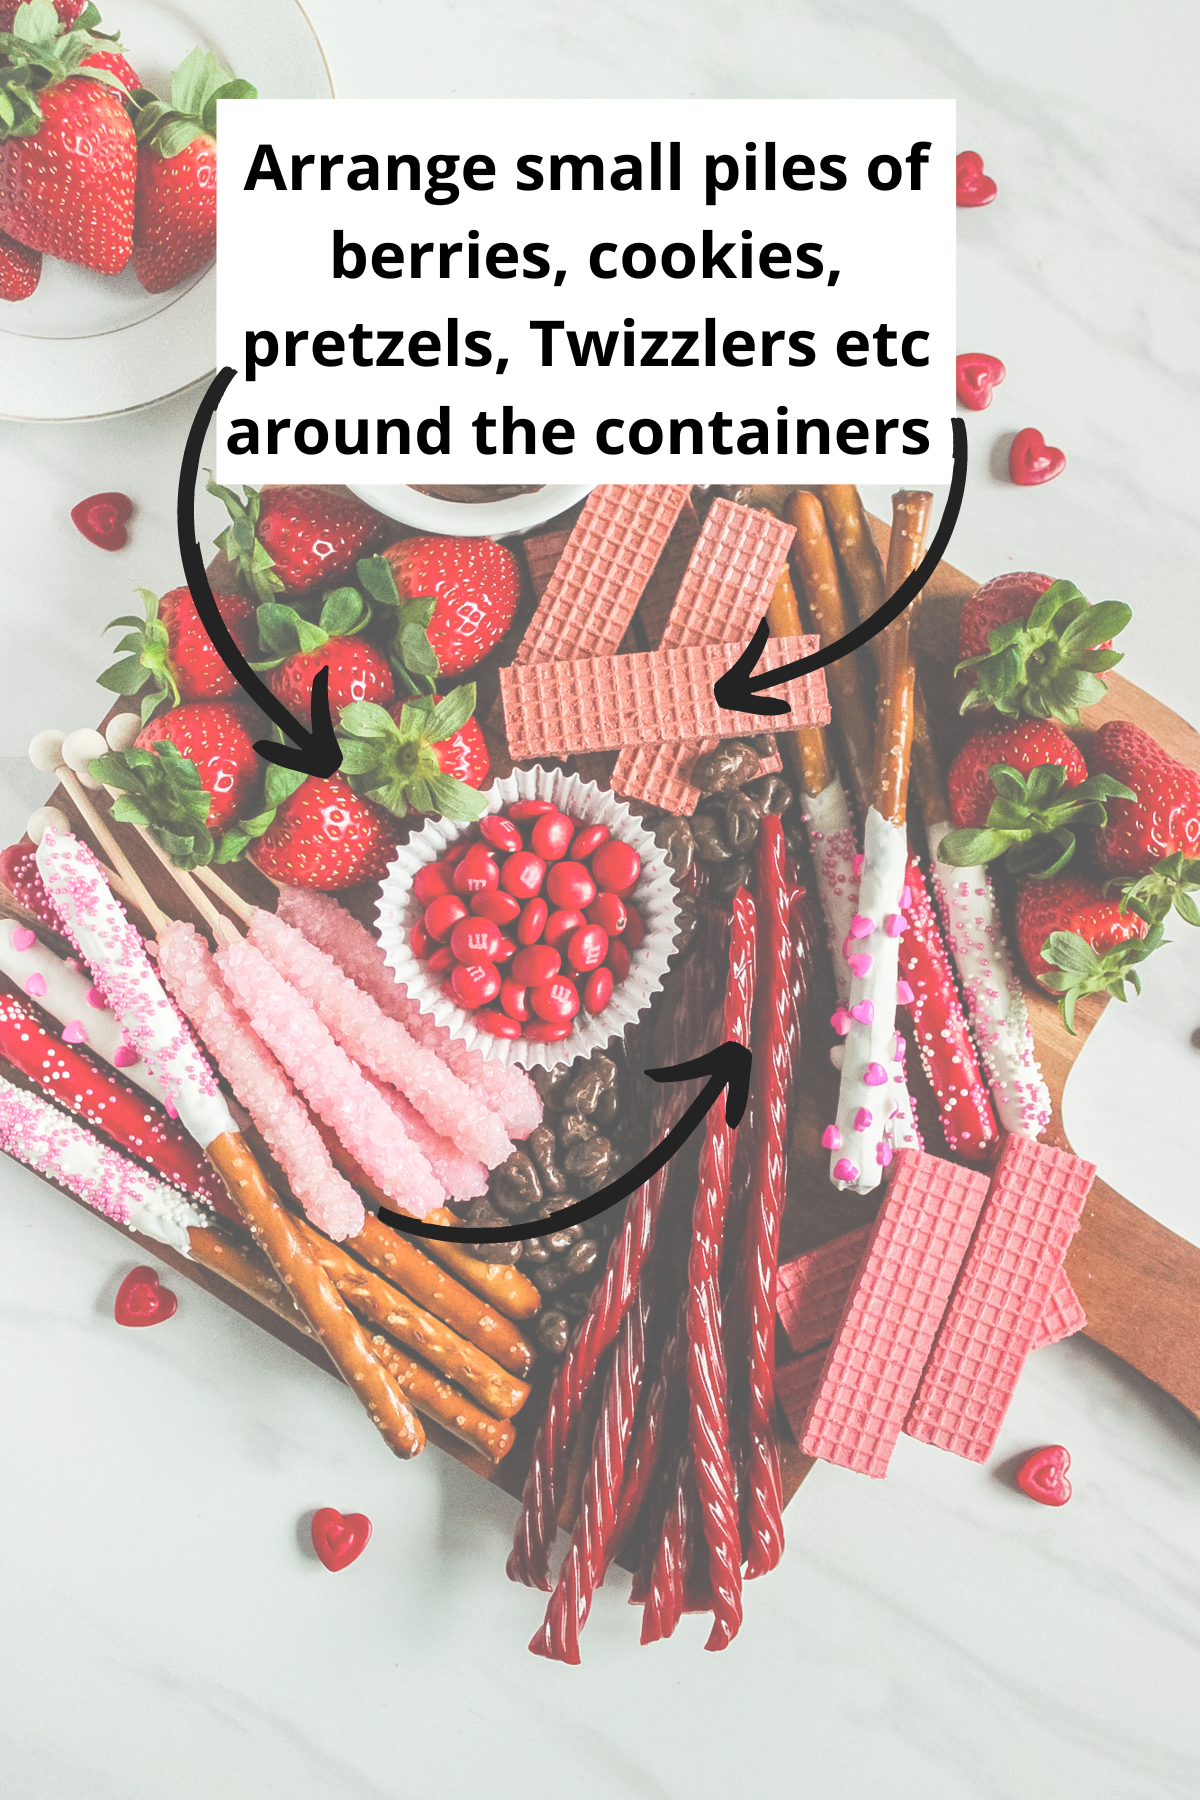 placing the larger food items such as the pretzel rods and twizzlers on the charcuterie board